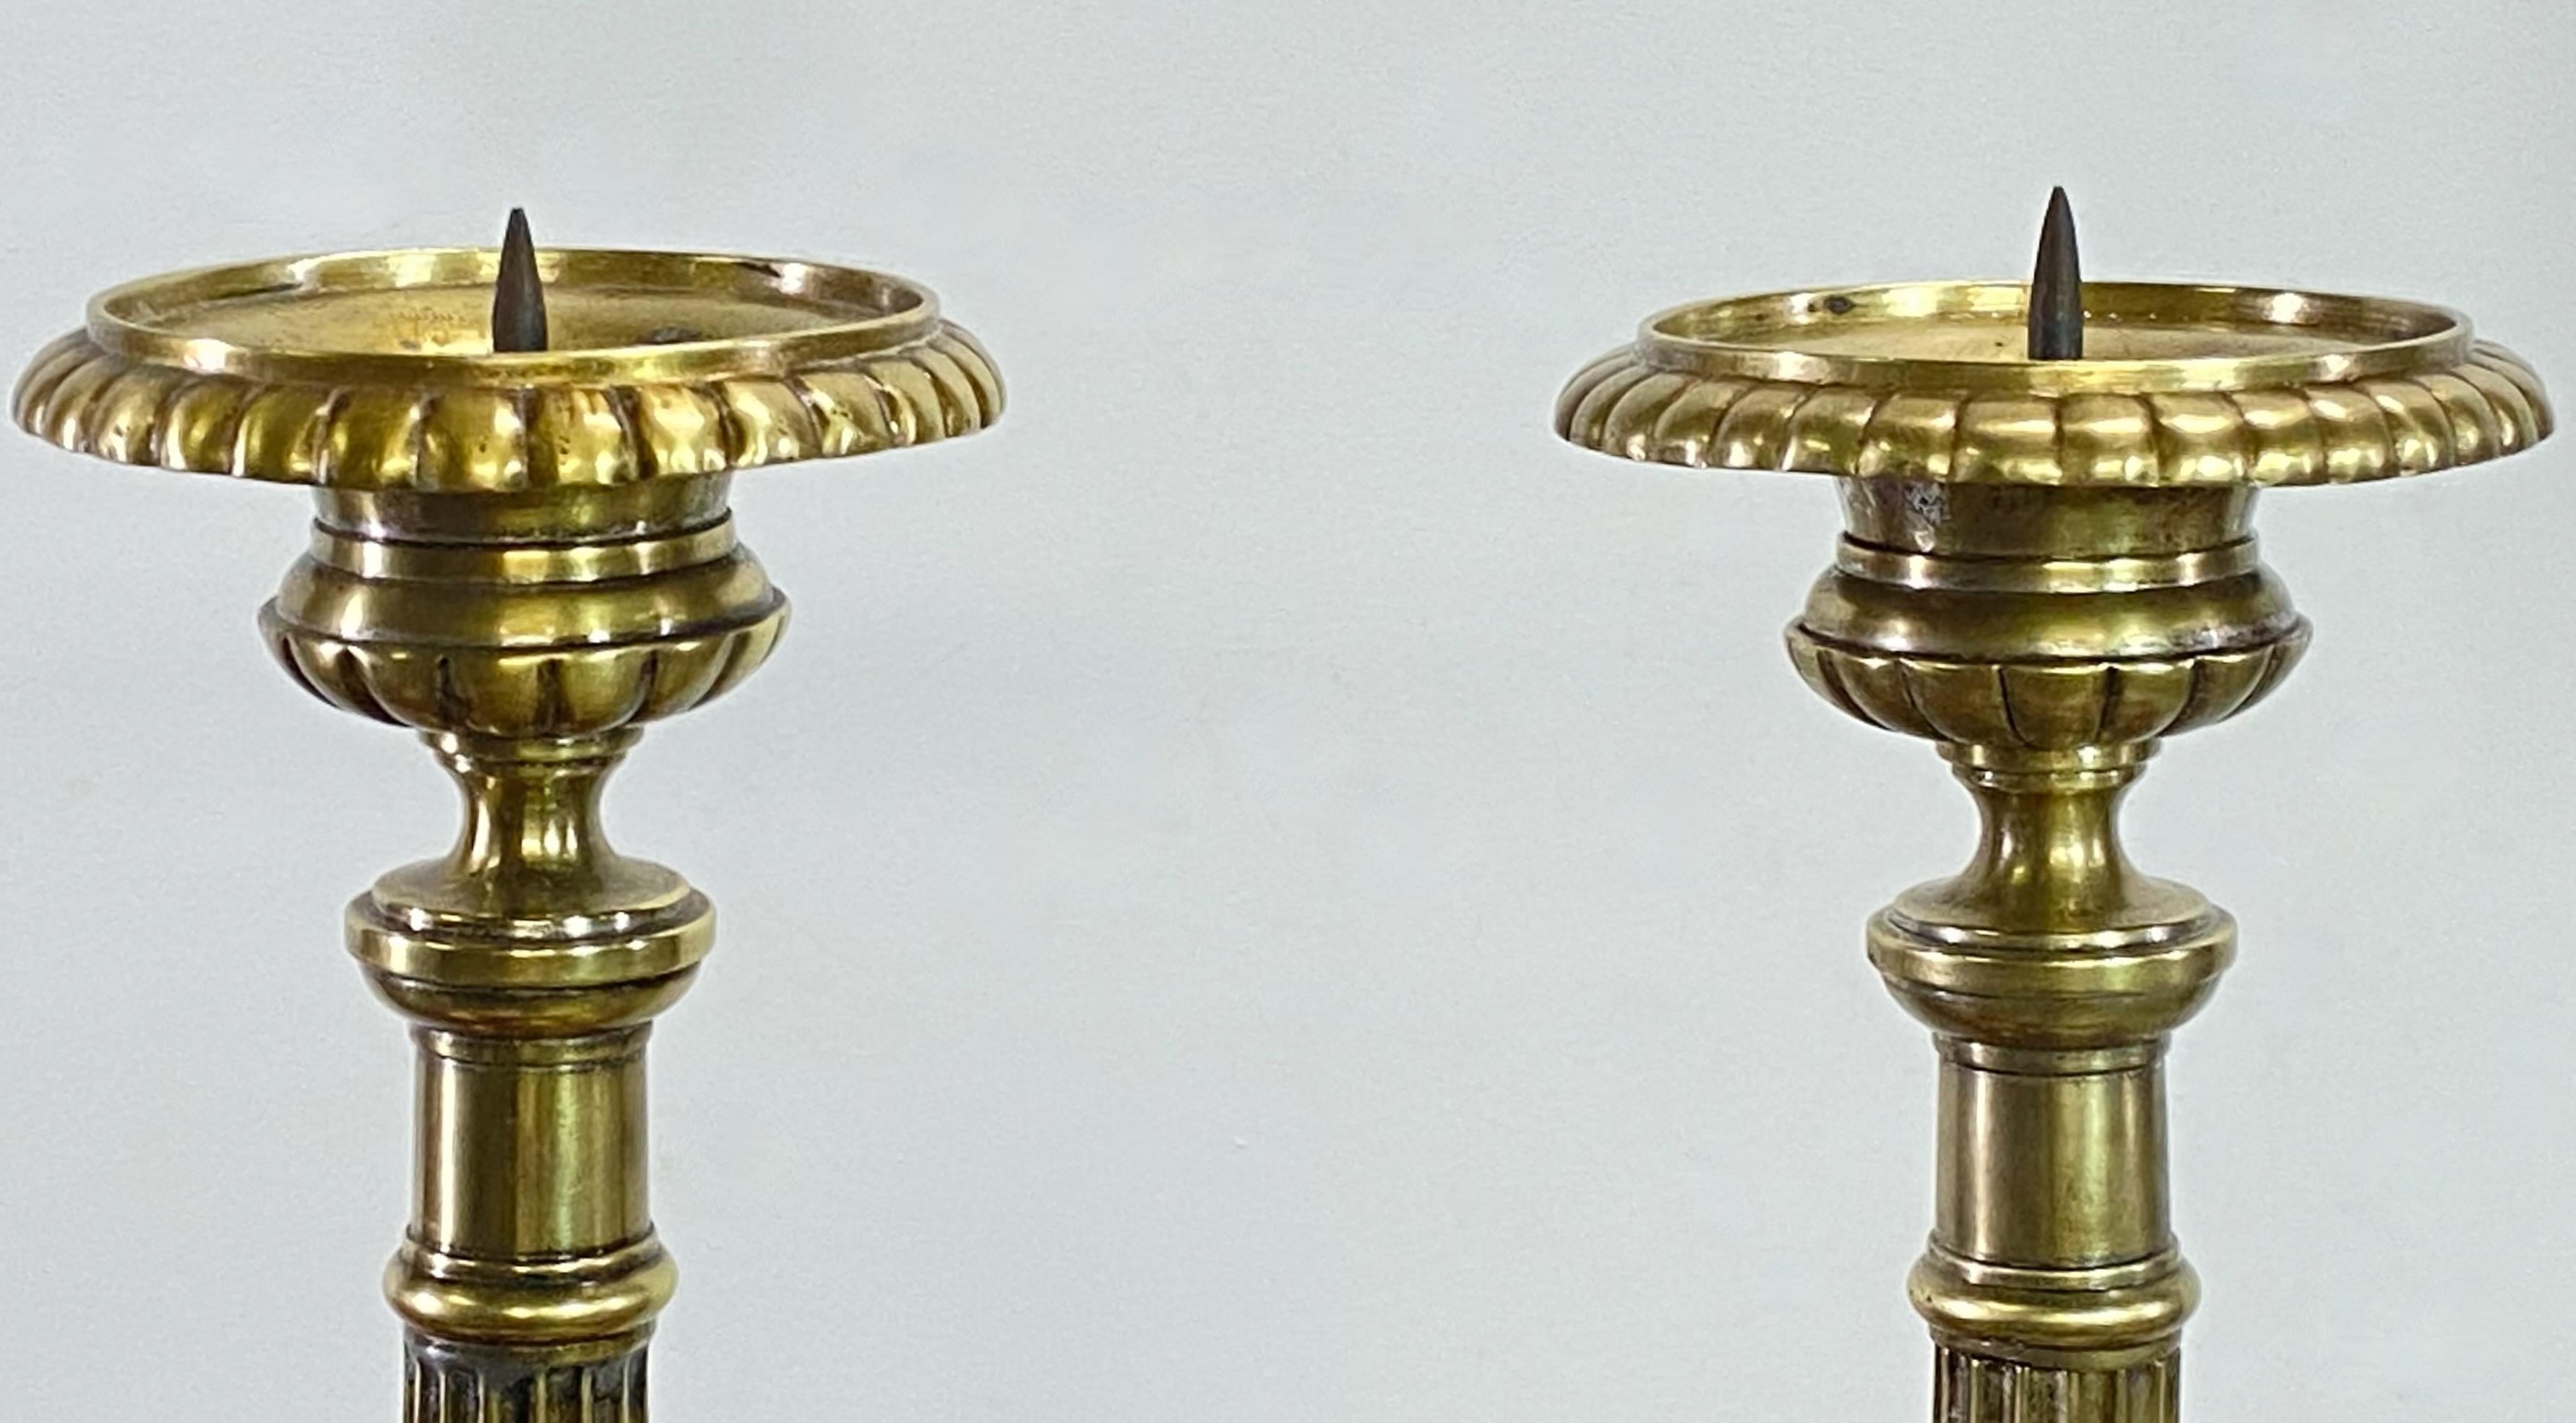 Pair of Early 19th Century European Brass Candlesticks, circa 1840 For Sale 4